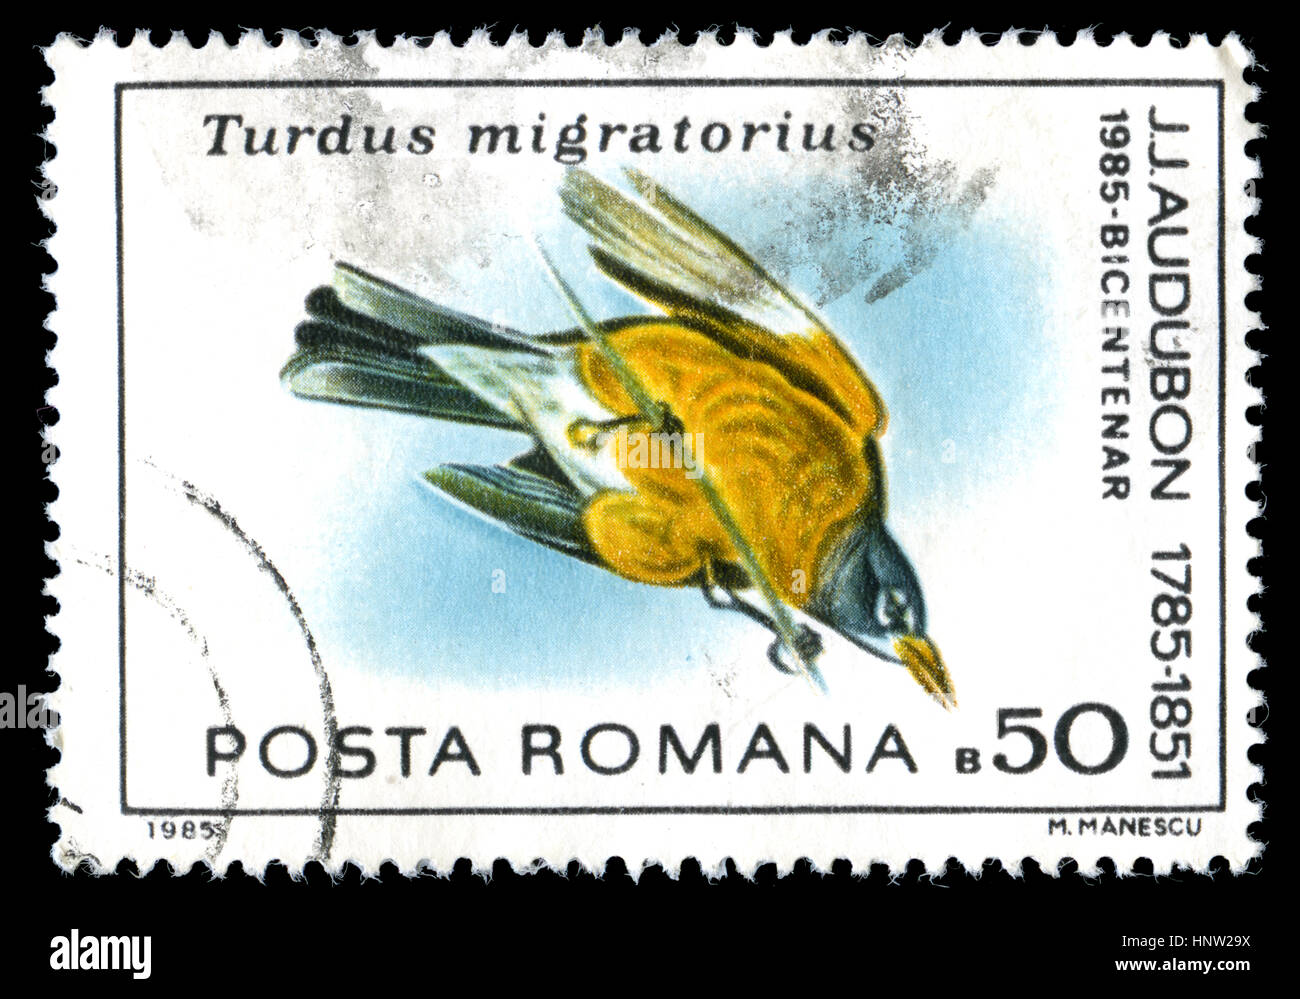 Postage stamp from Romania in the Birds of J.J.Audubon series issued in 1985 Stock Photo